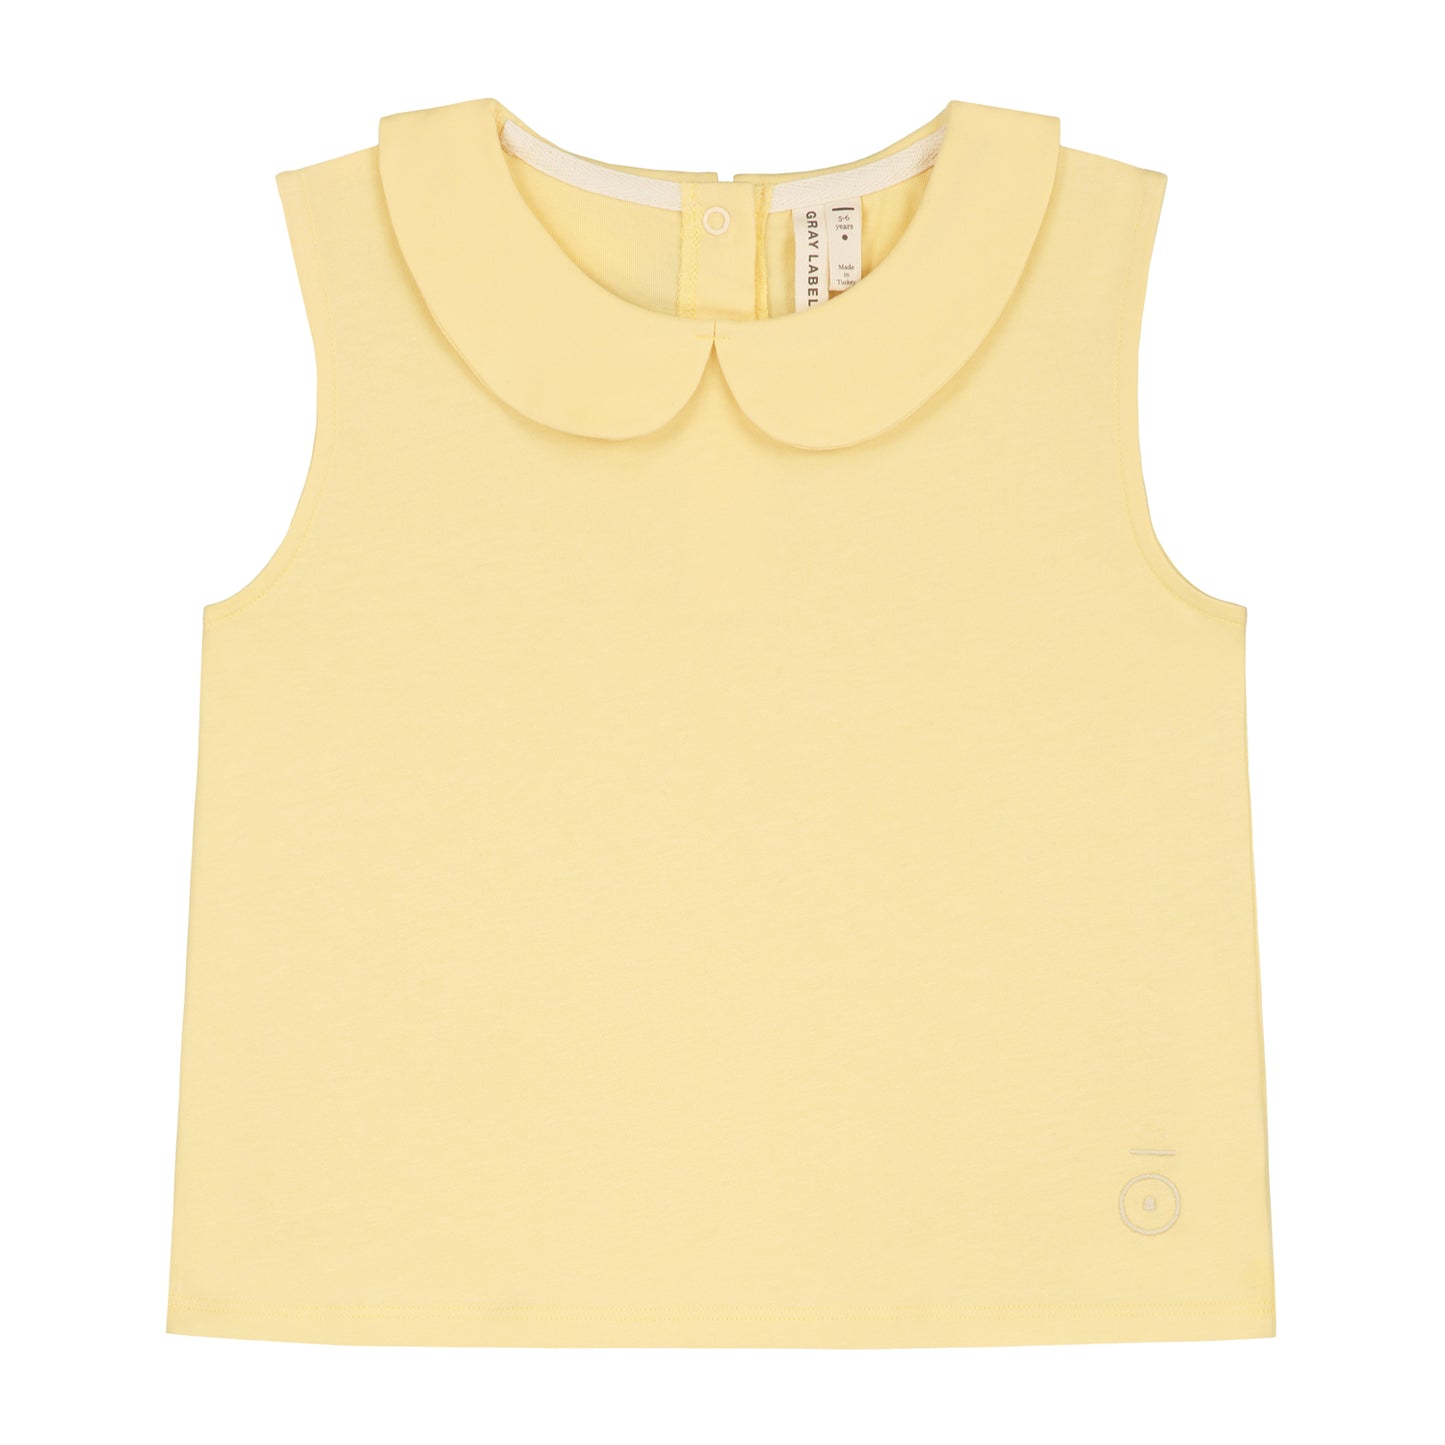 Alf & Co is a midlands based children’s store and they are stockist of the gray Label Collared Sleeveless Top in Mellow Yellow 